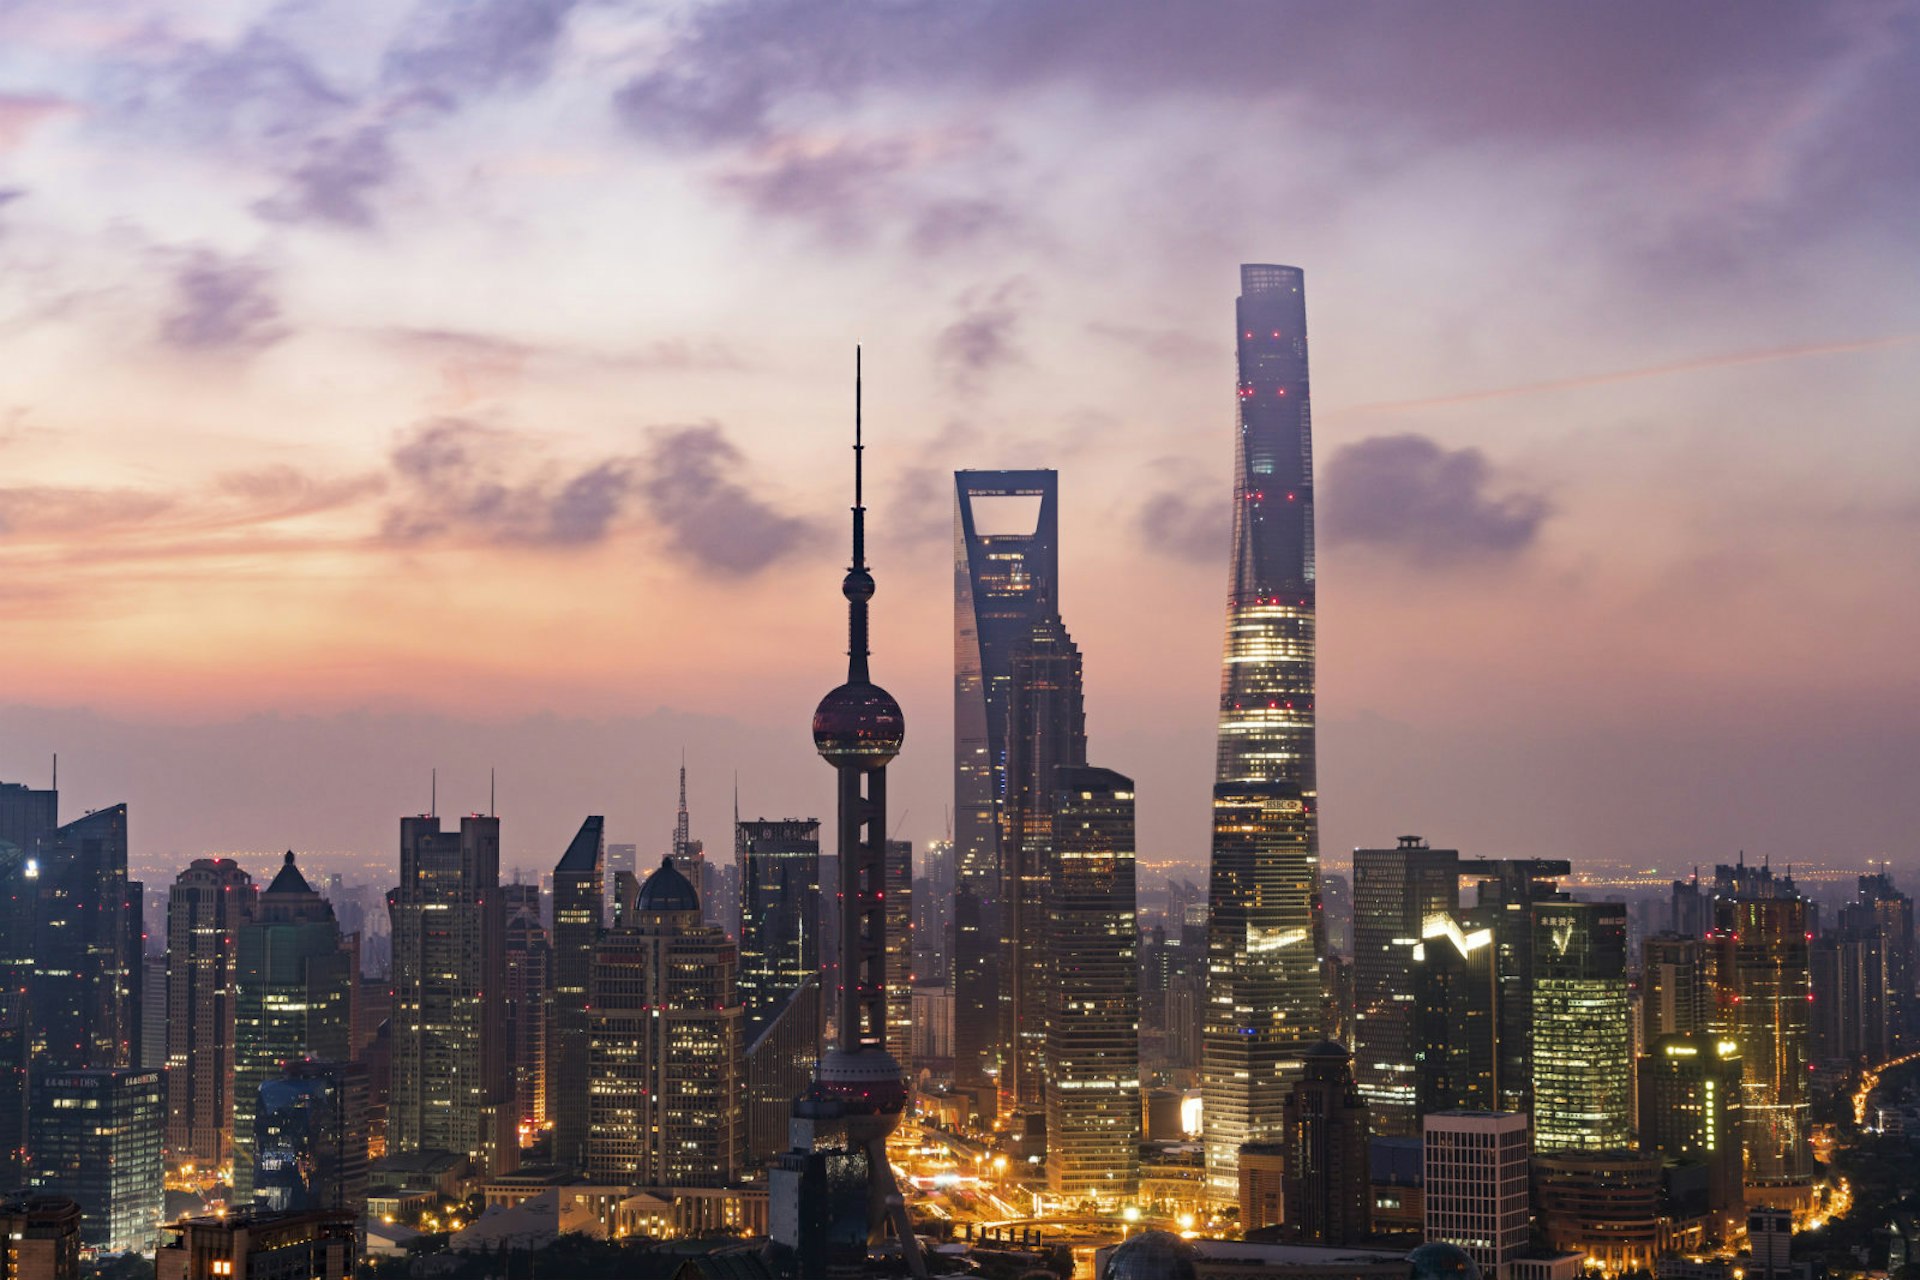 Cities for architecture lovers - Shanghai's unmistakable skyline at dusk